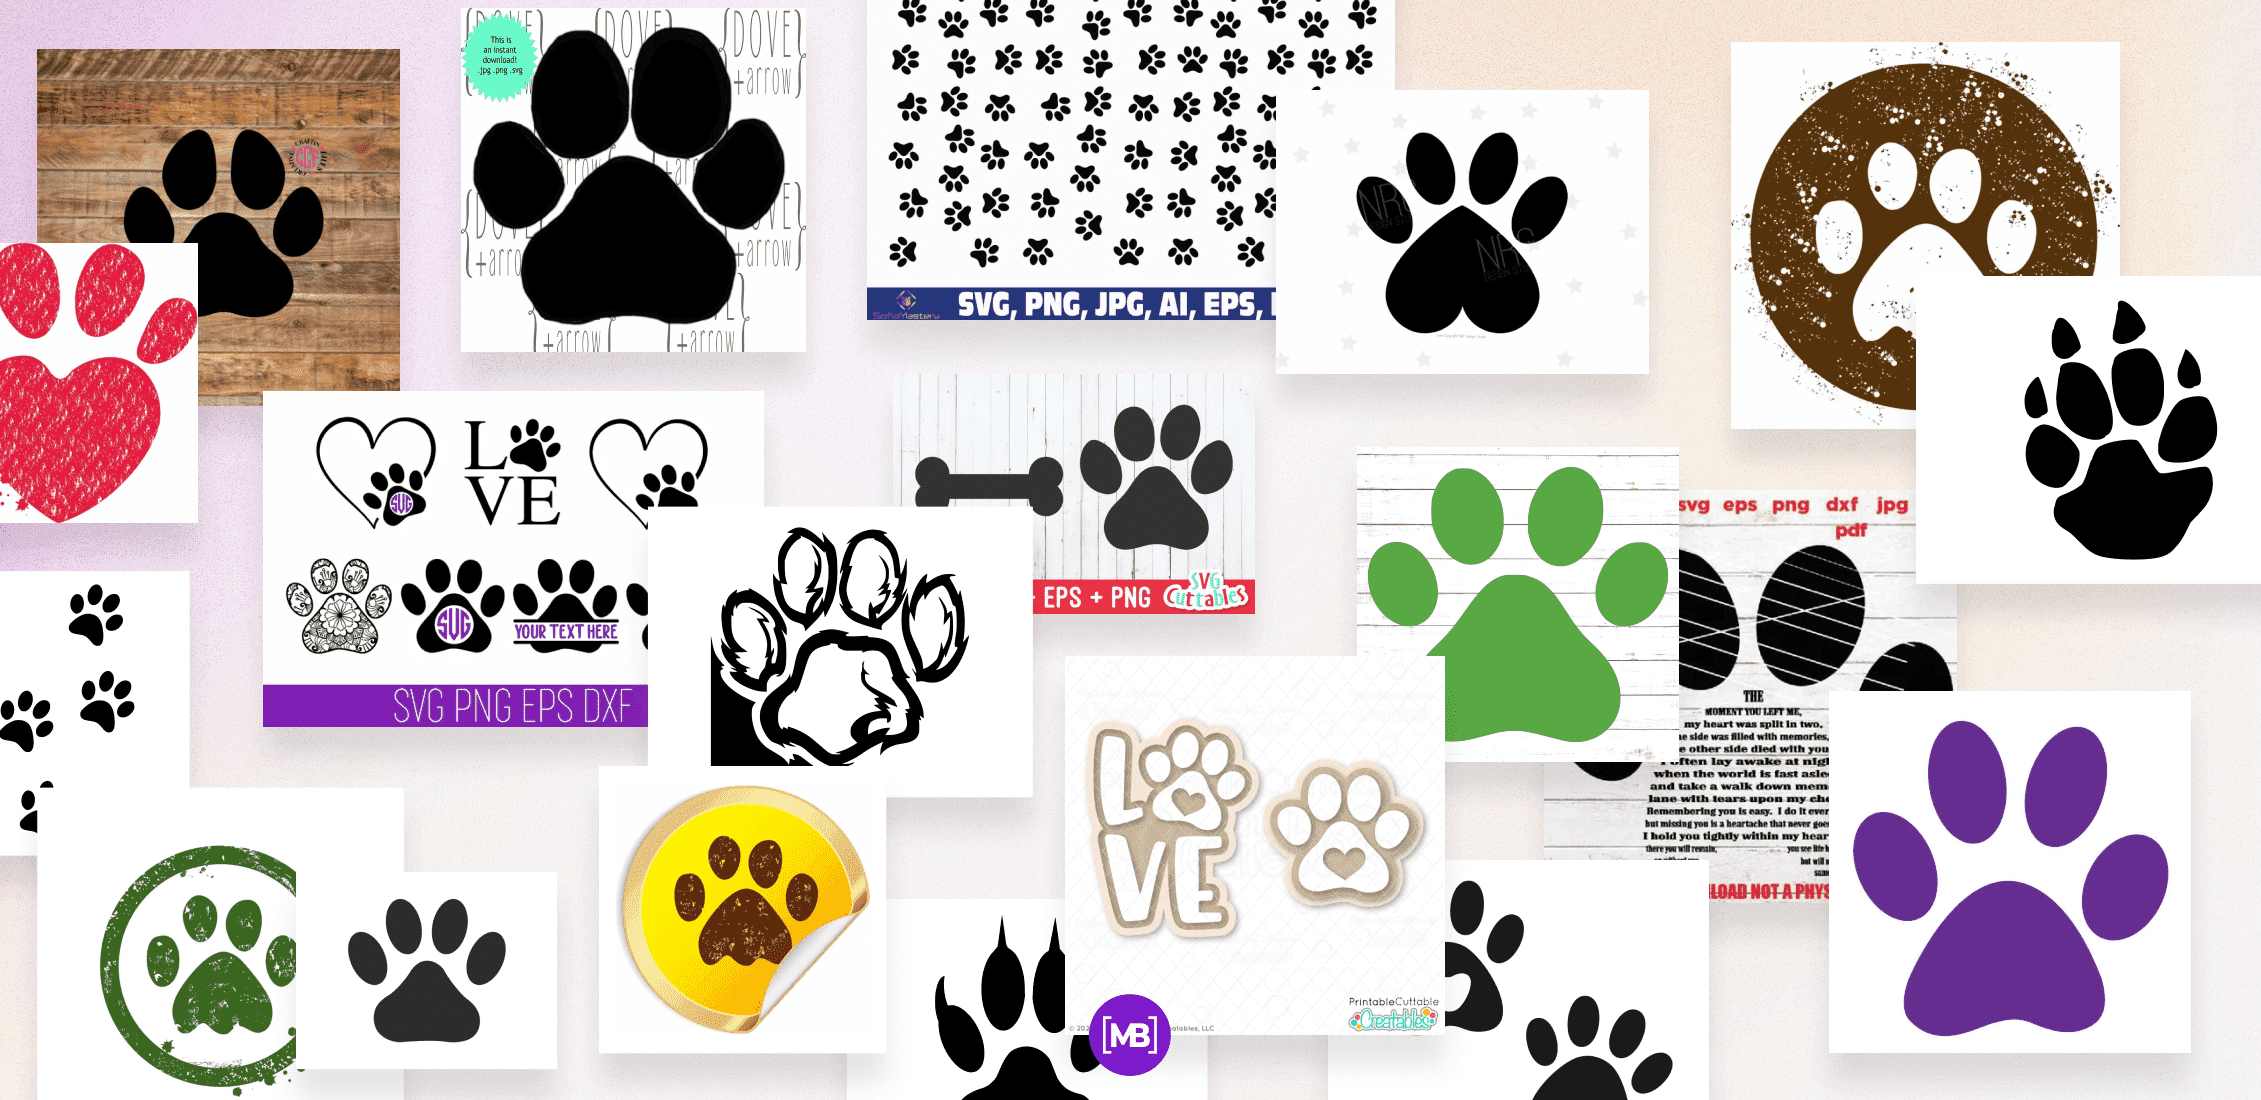 Paw Print SVG Images Example.